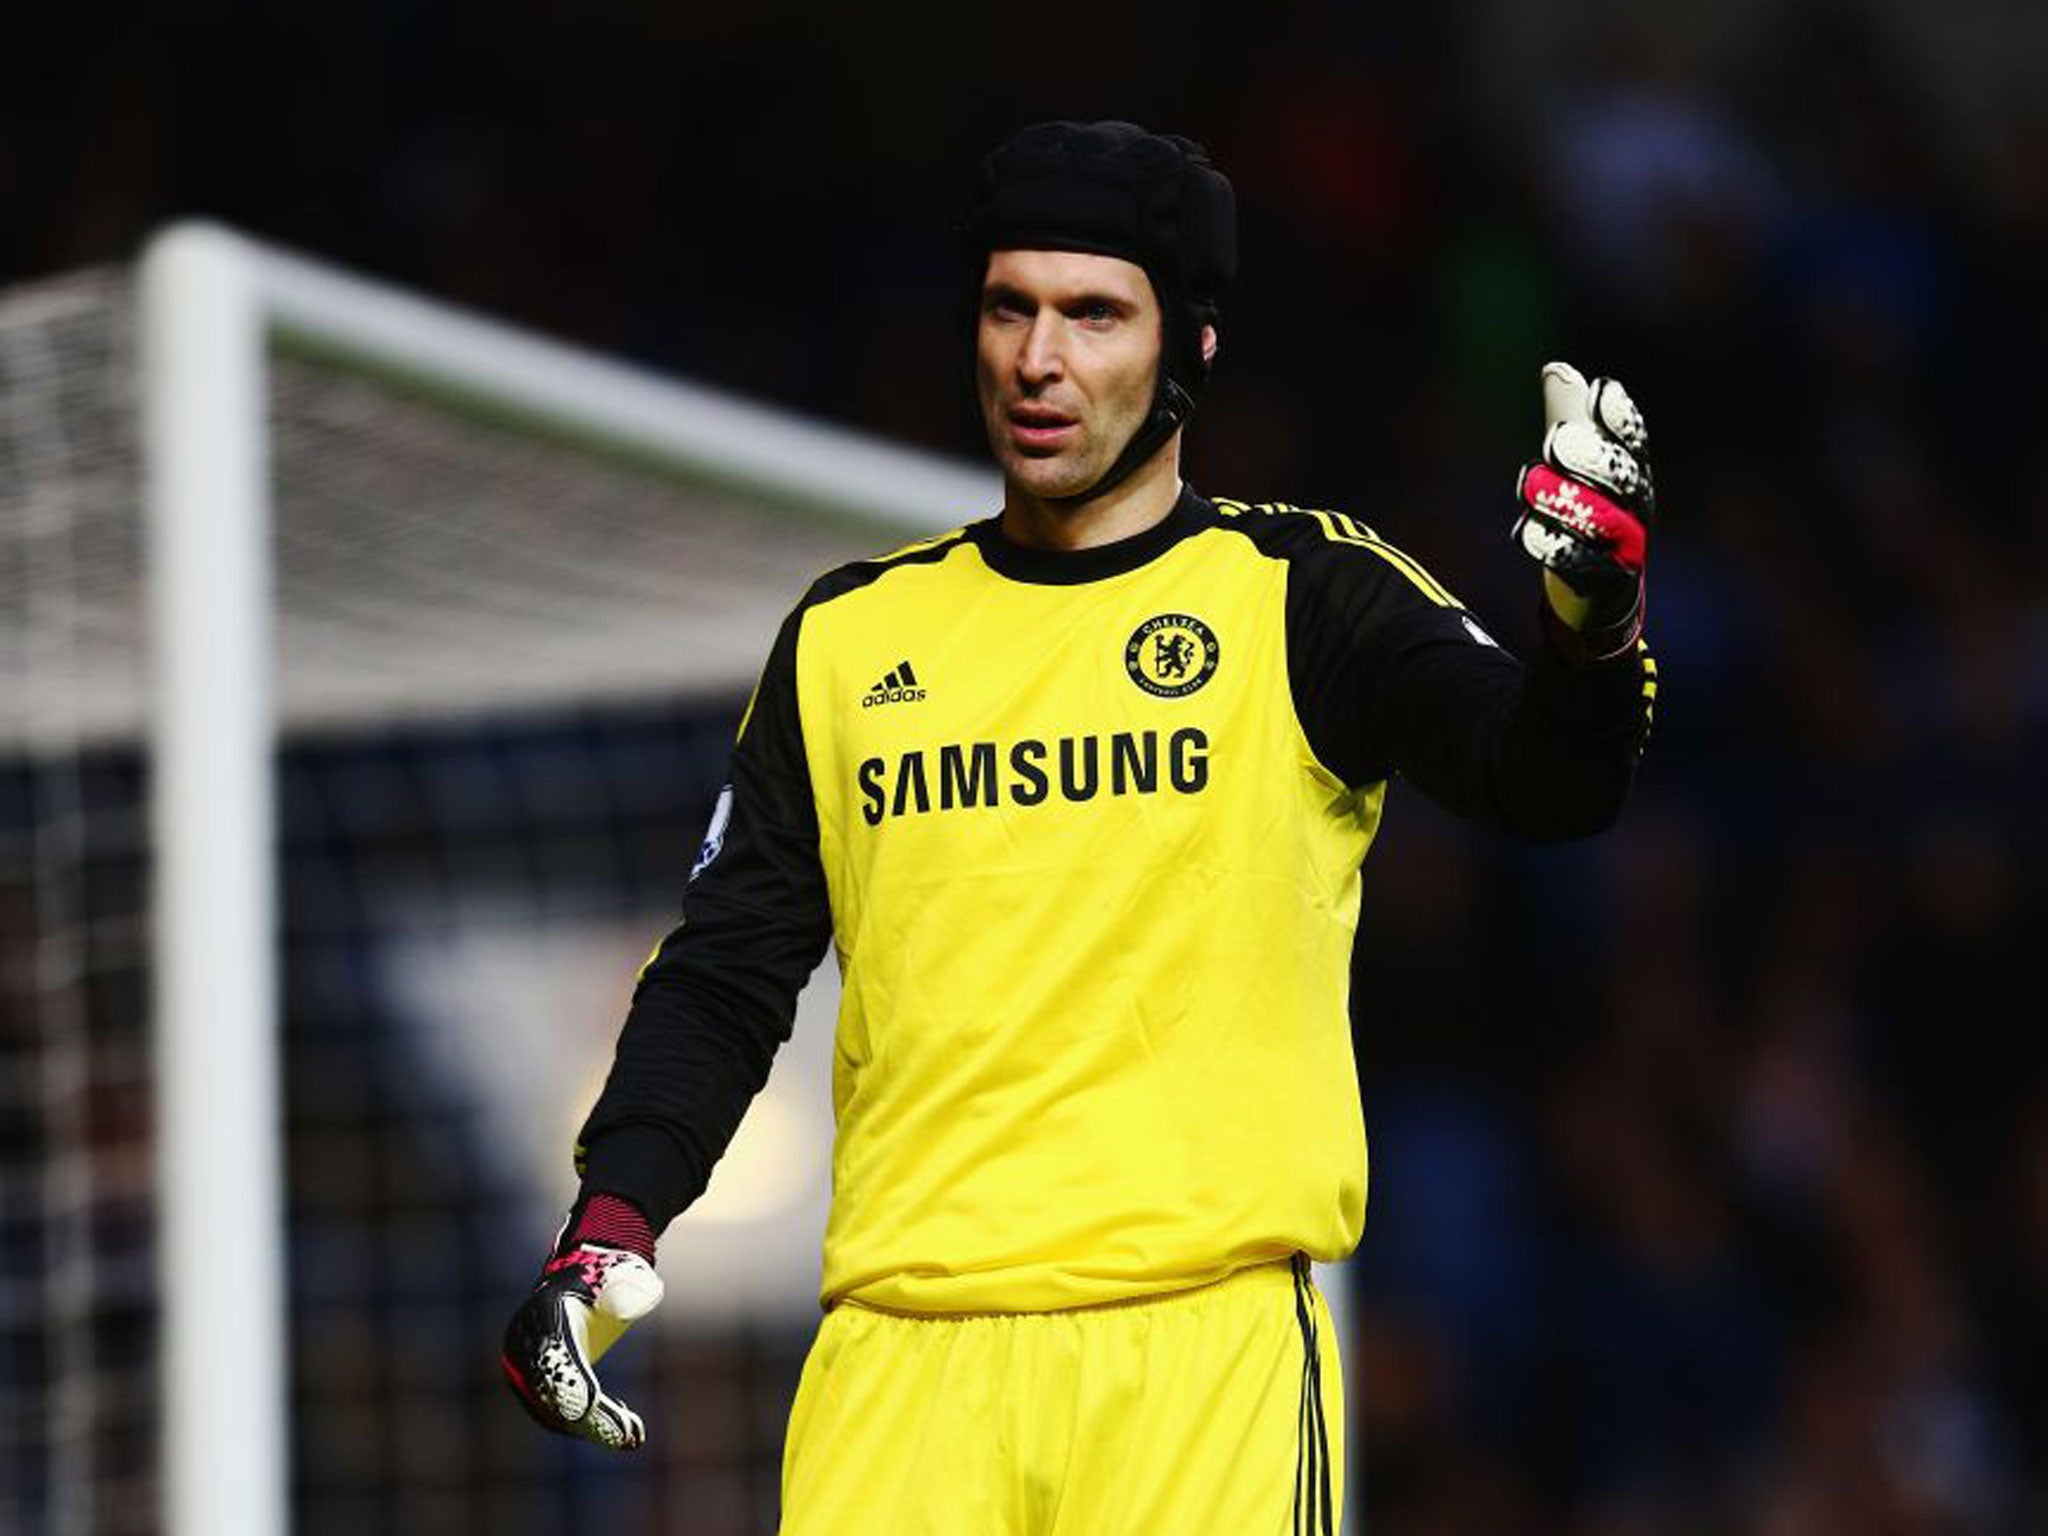 Petr Cech has questioned whether Liverpool can go on and win the Premier League